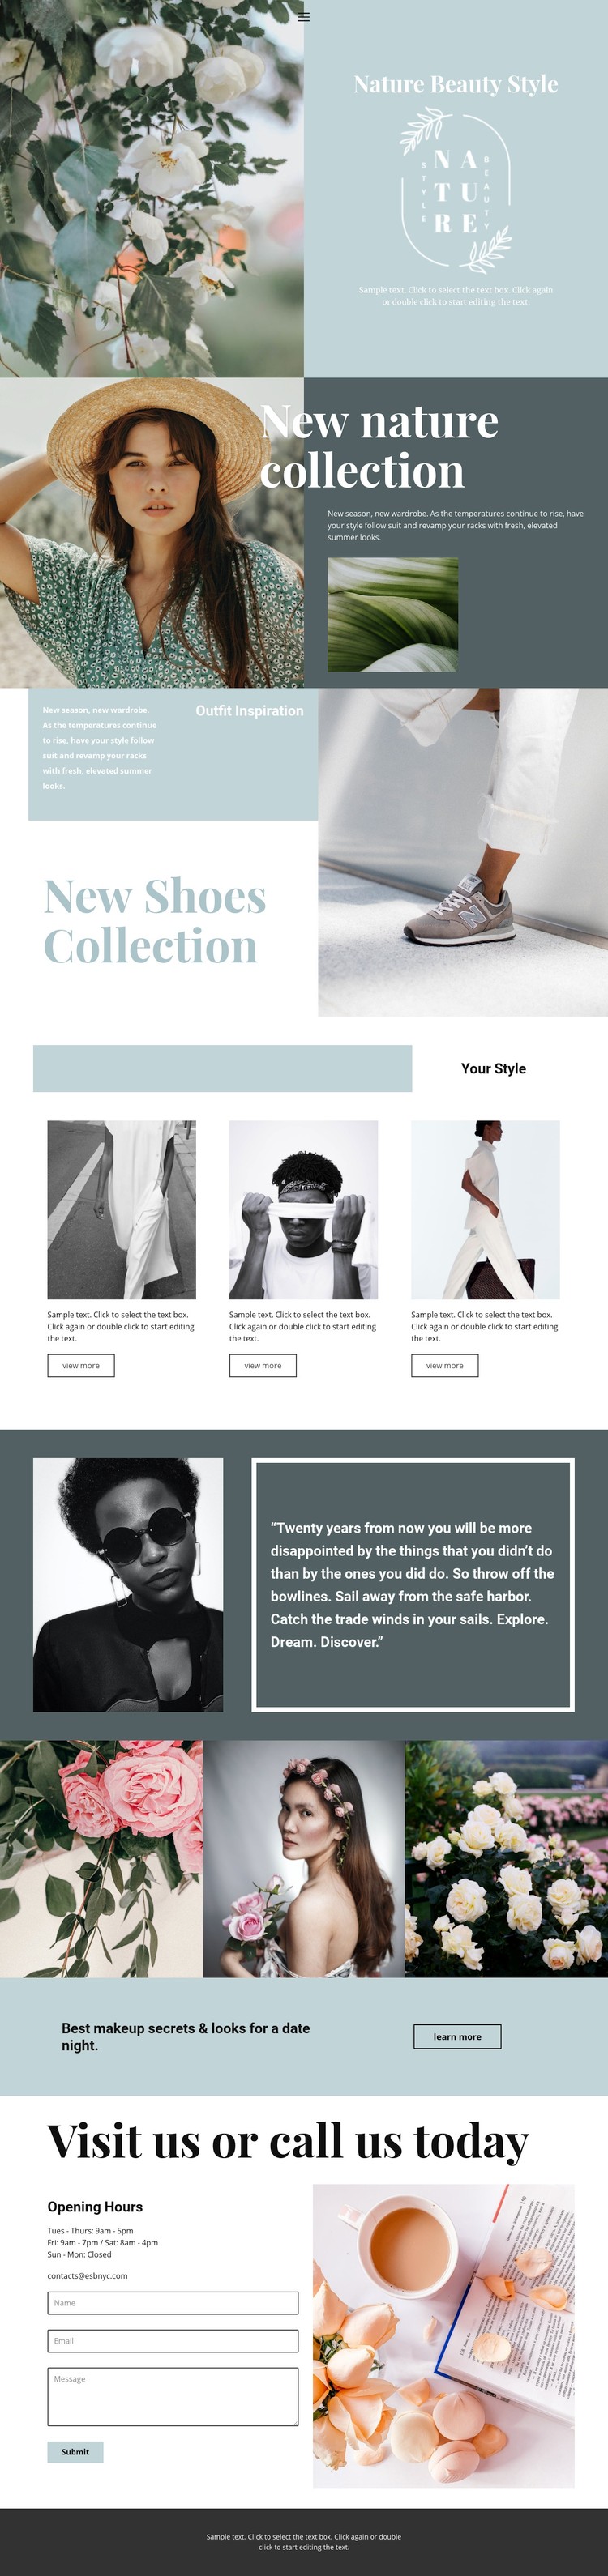 Nature collection Webflow Template Alternative